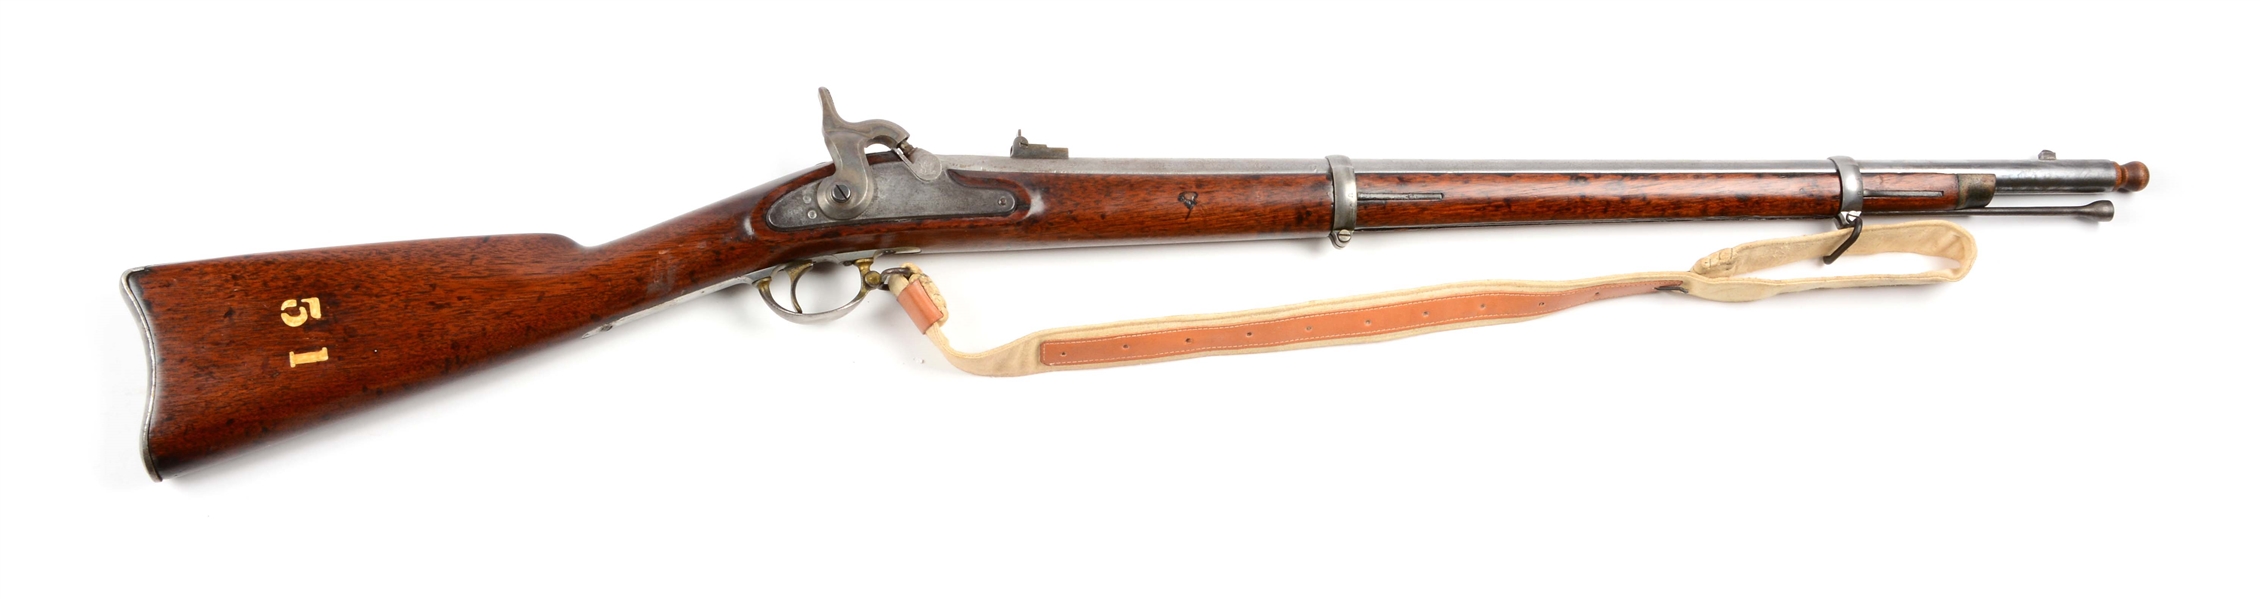 (A) ALTERED U.S. SPRINGFIELD MODEL 1863 RIFLE. 